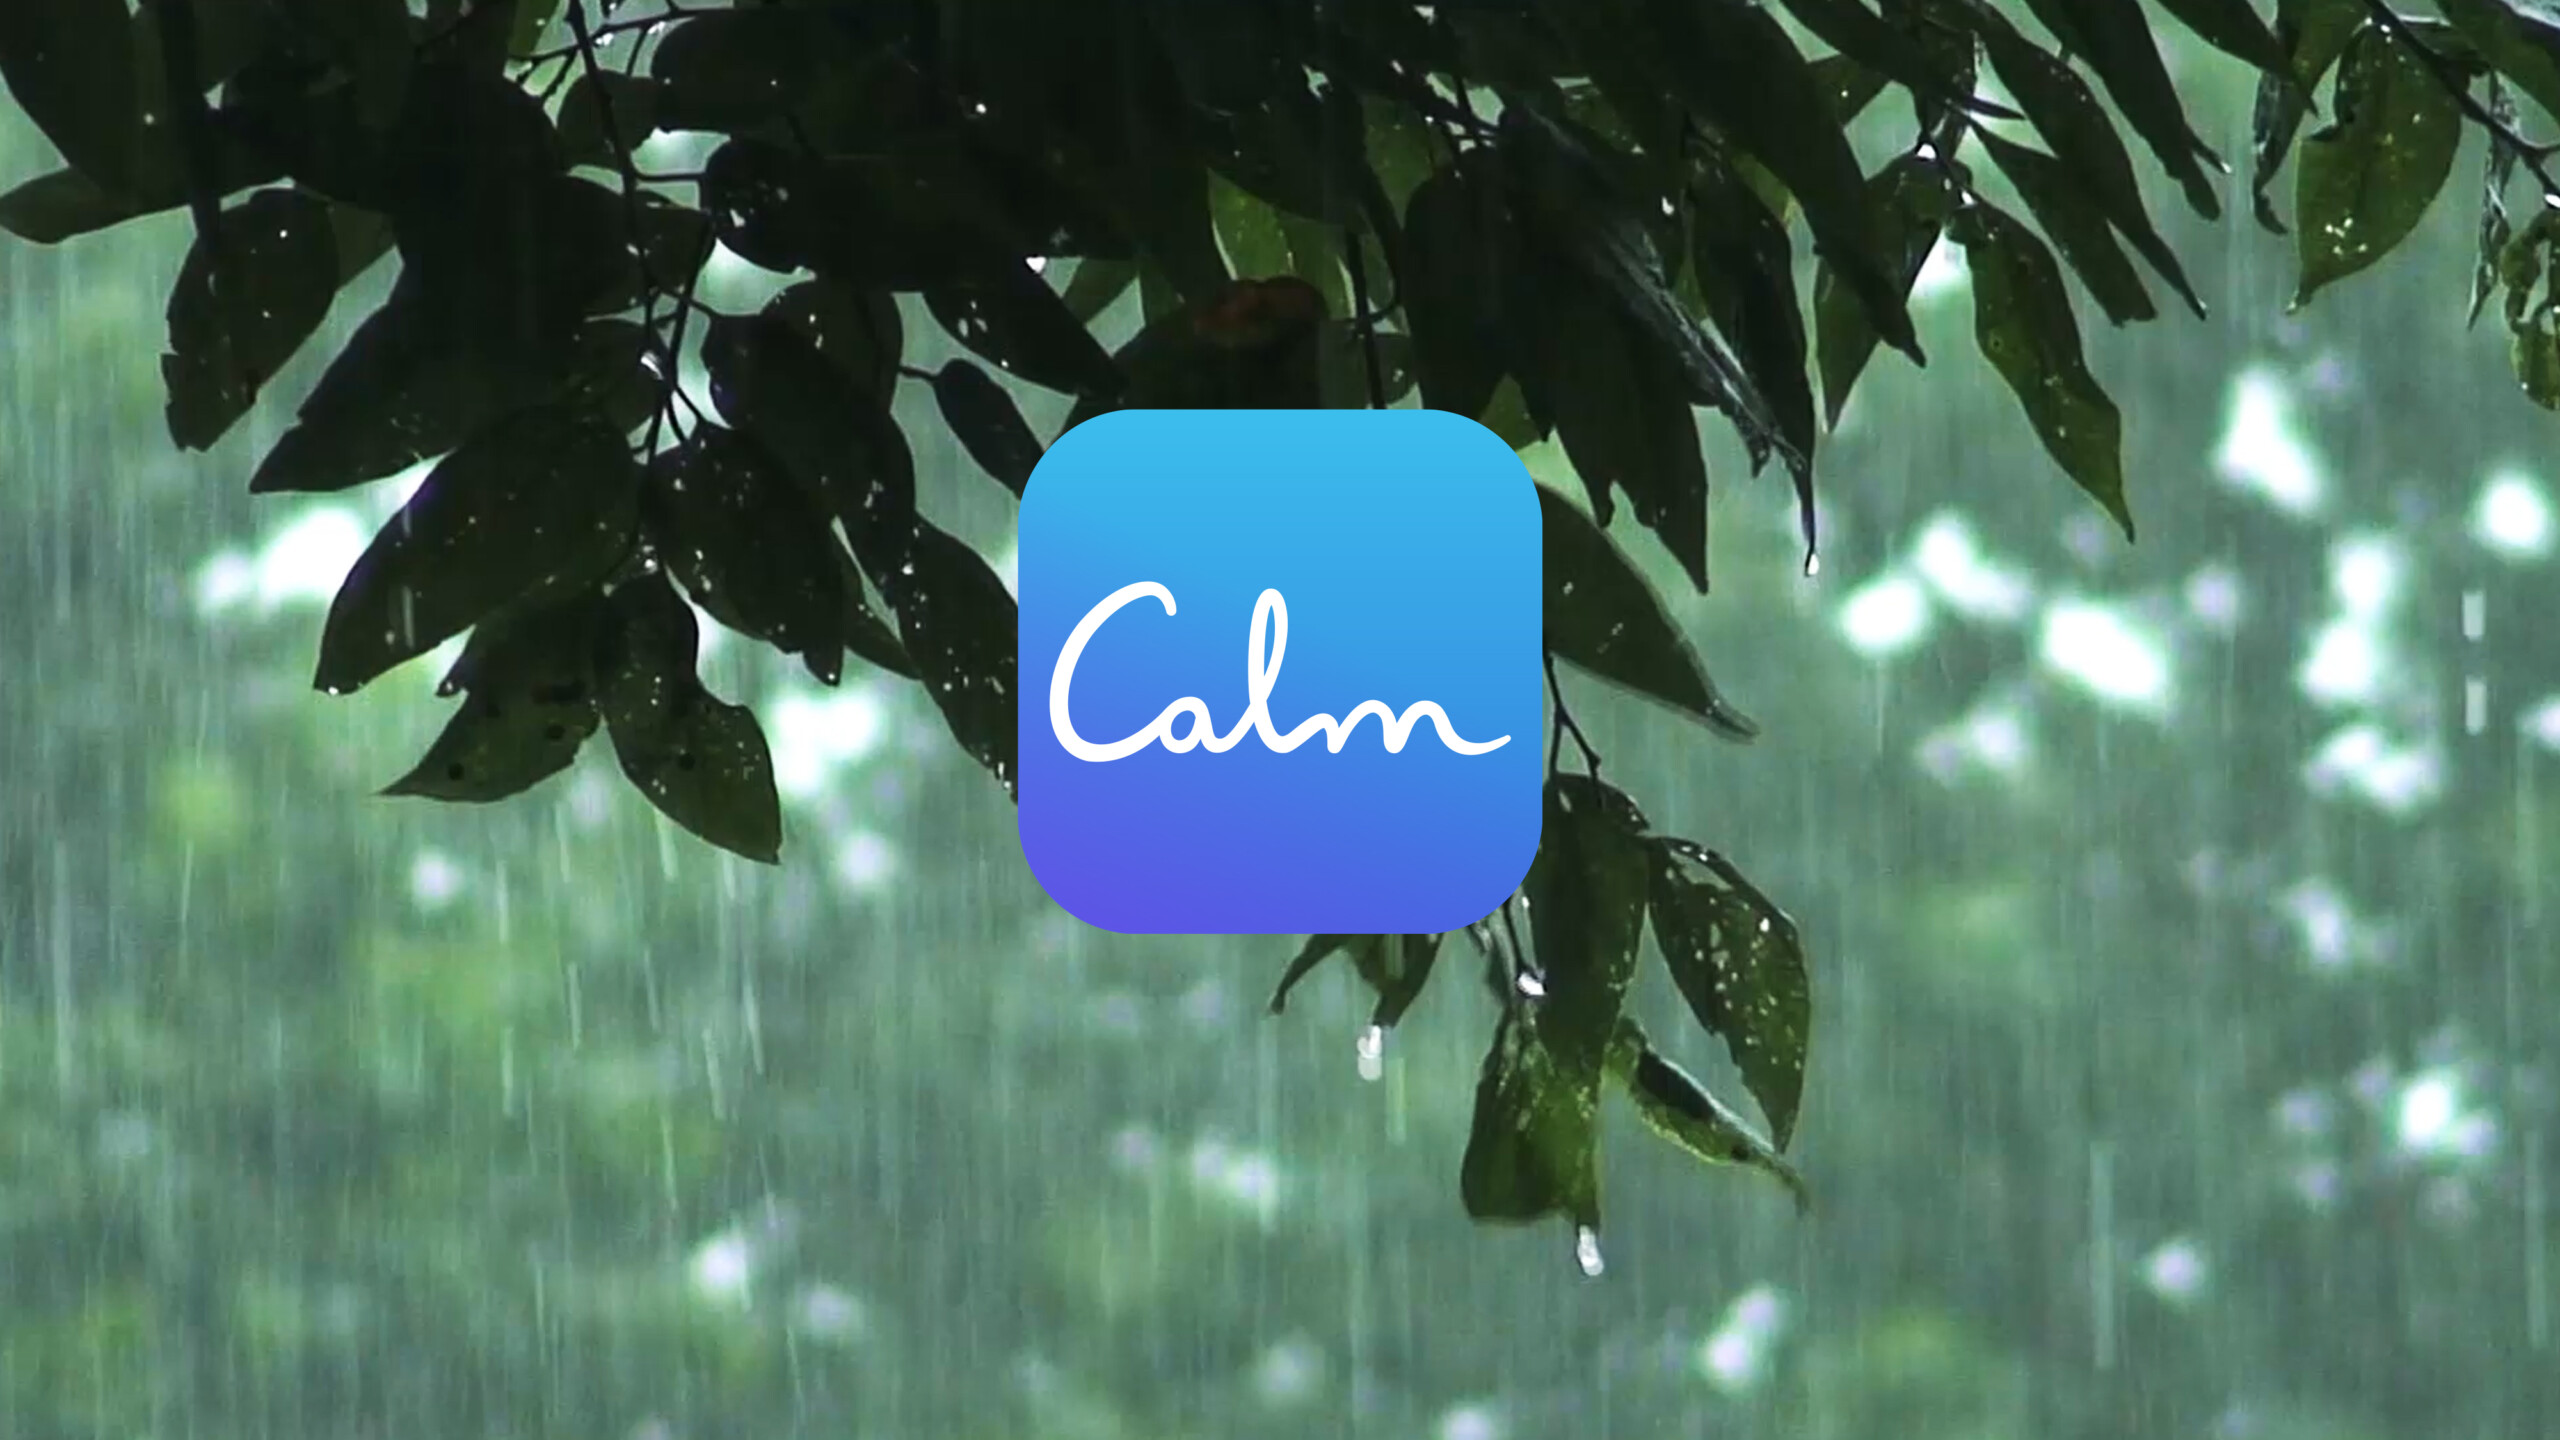 Calm app logo in front of trees with falling rain